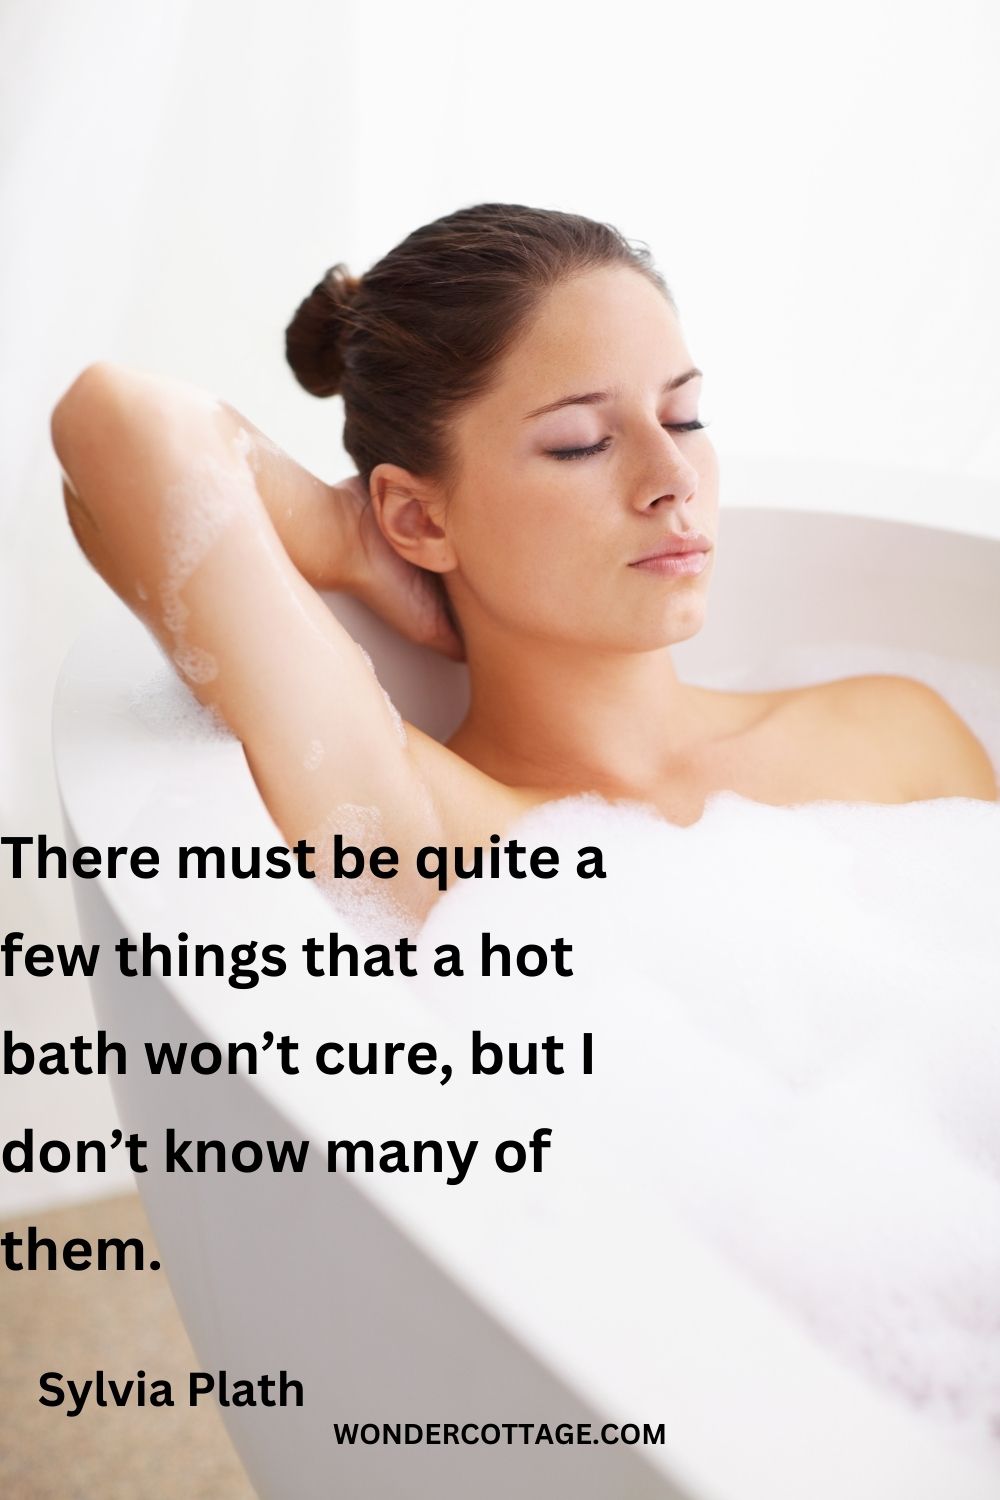 There must be quite a few things that a hot bath won’t cure, but I don’t know many of them.
Sylvia Plath